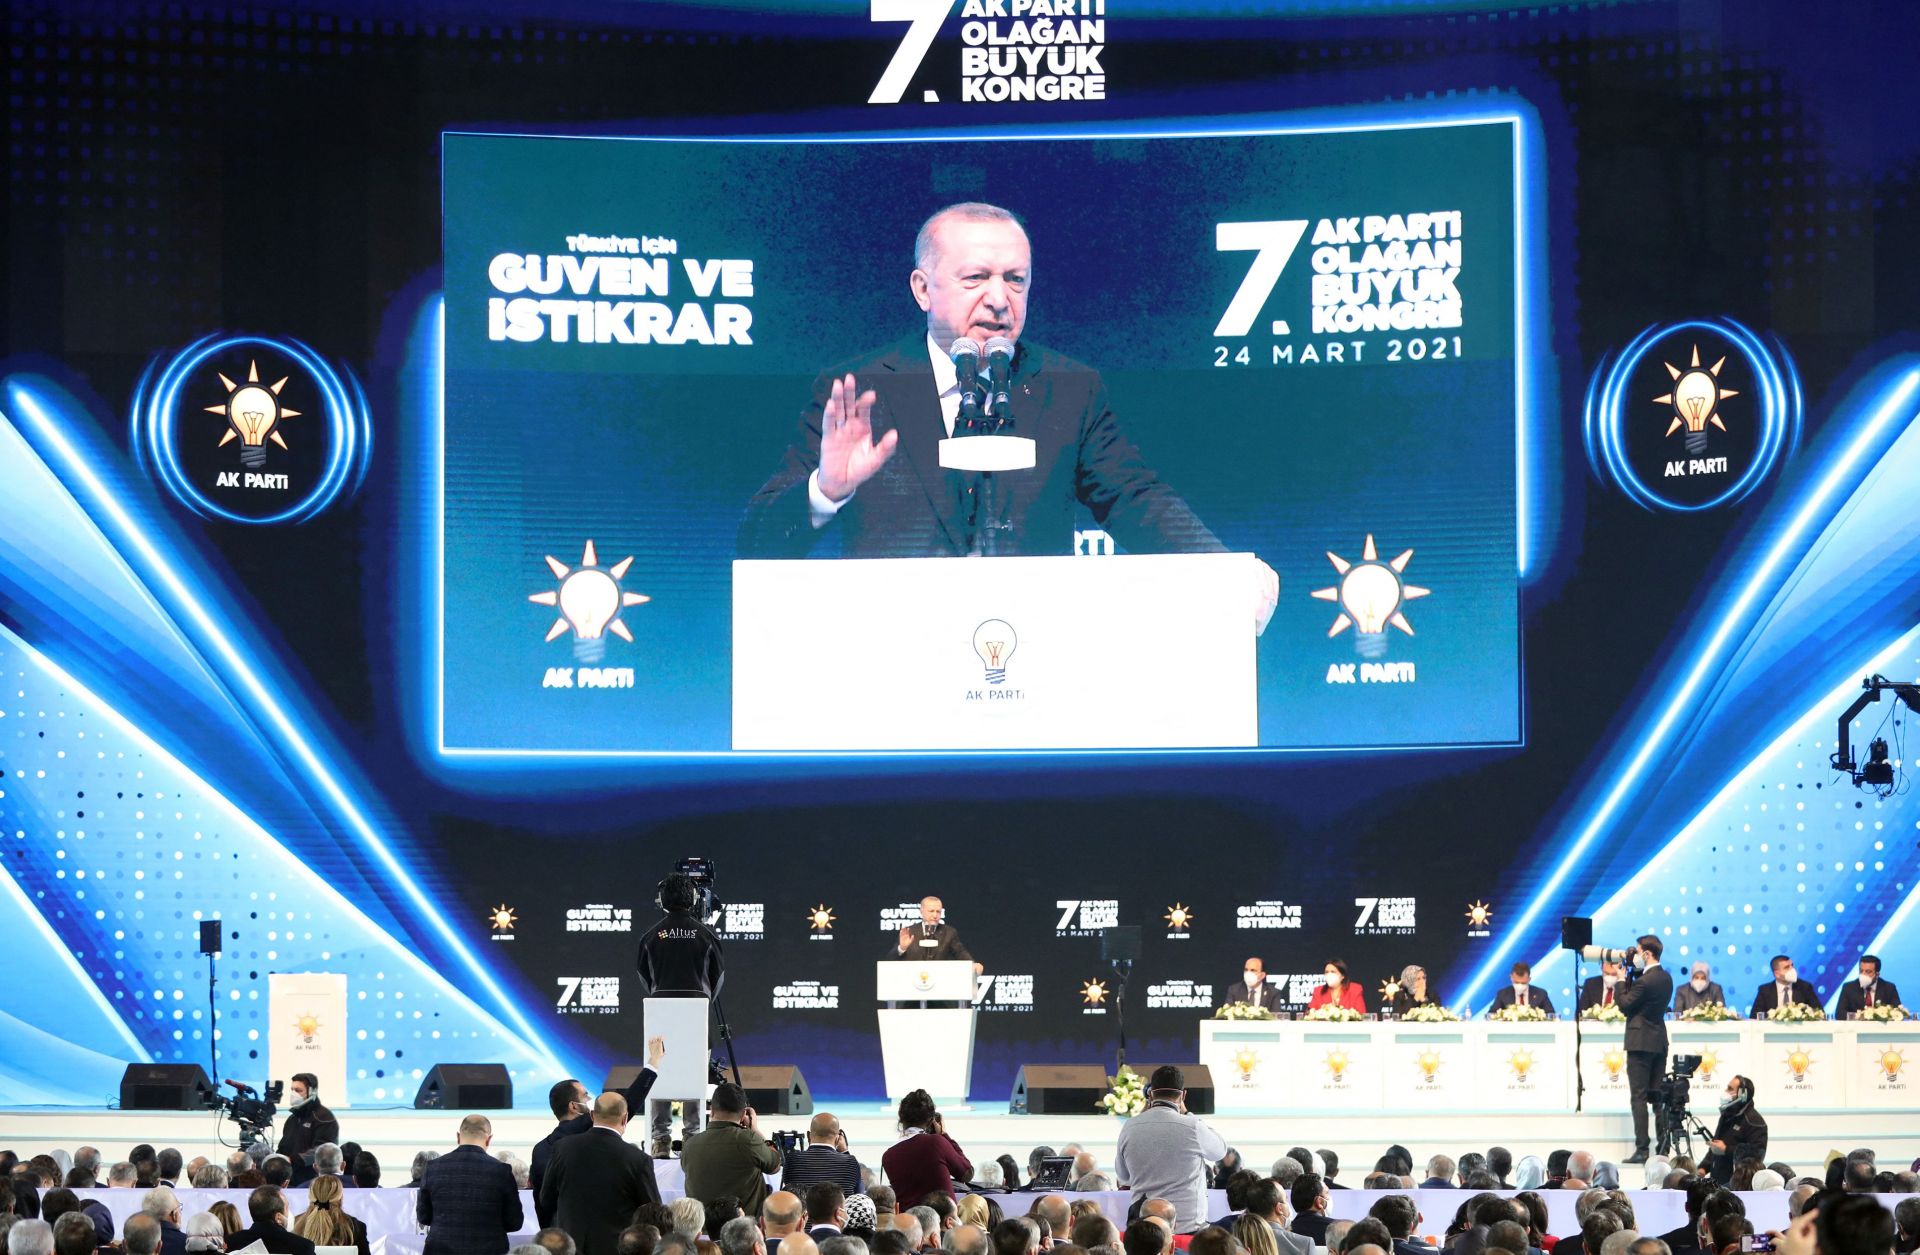 Turkish President Recep Tayyip Erdogan addresses supporters of his ruling Justice and Development Party during a political rally in Ankara on March 24, 2021. 